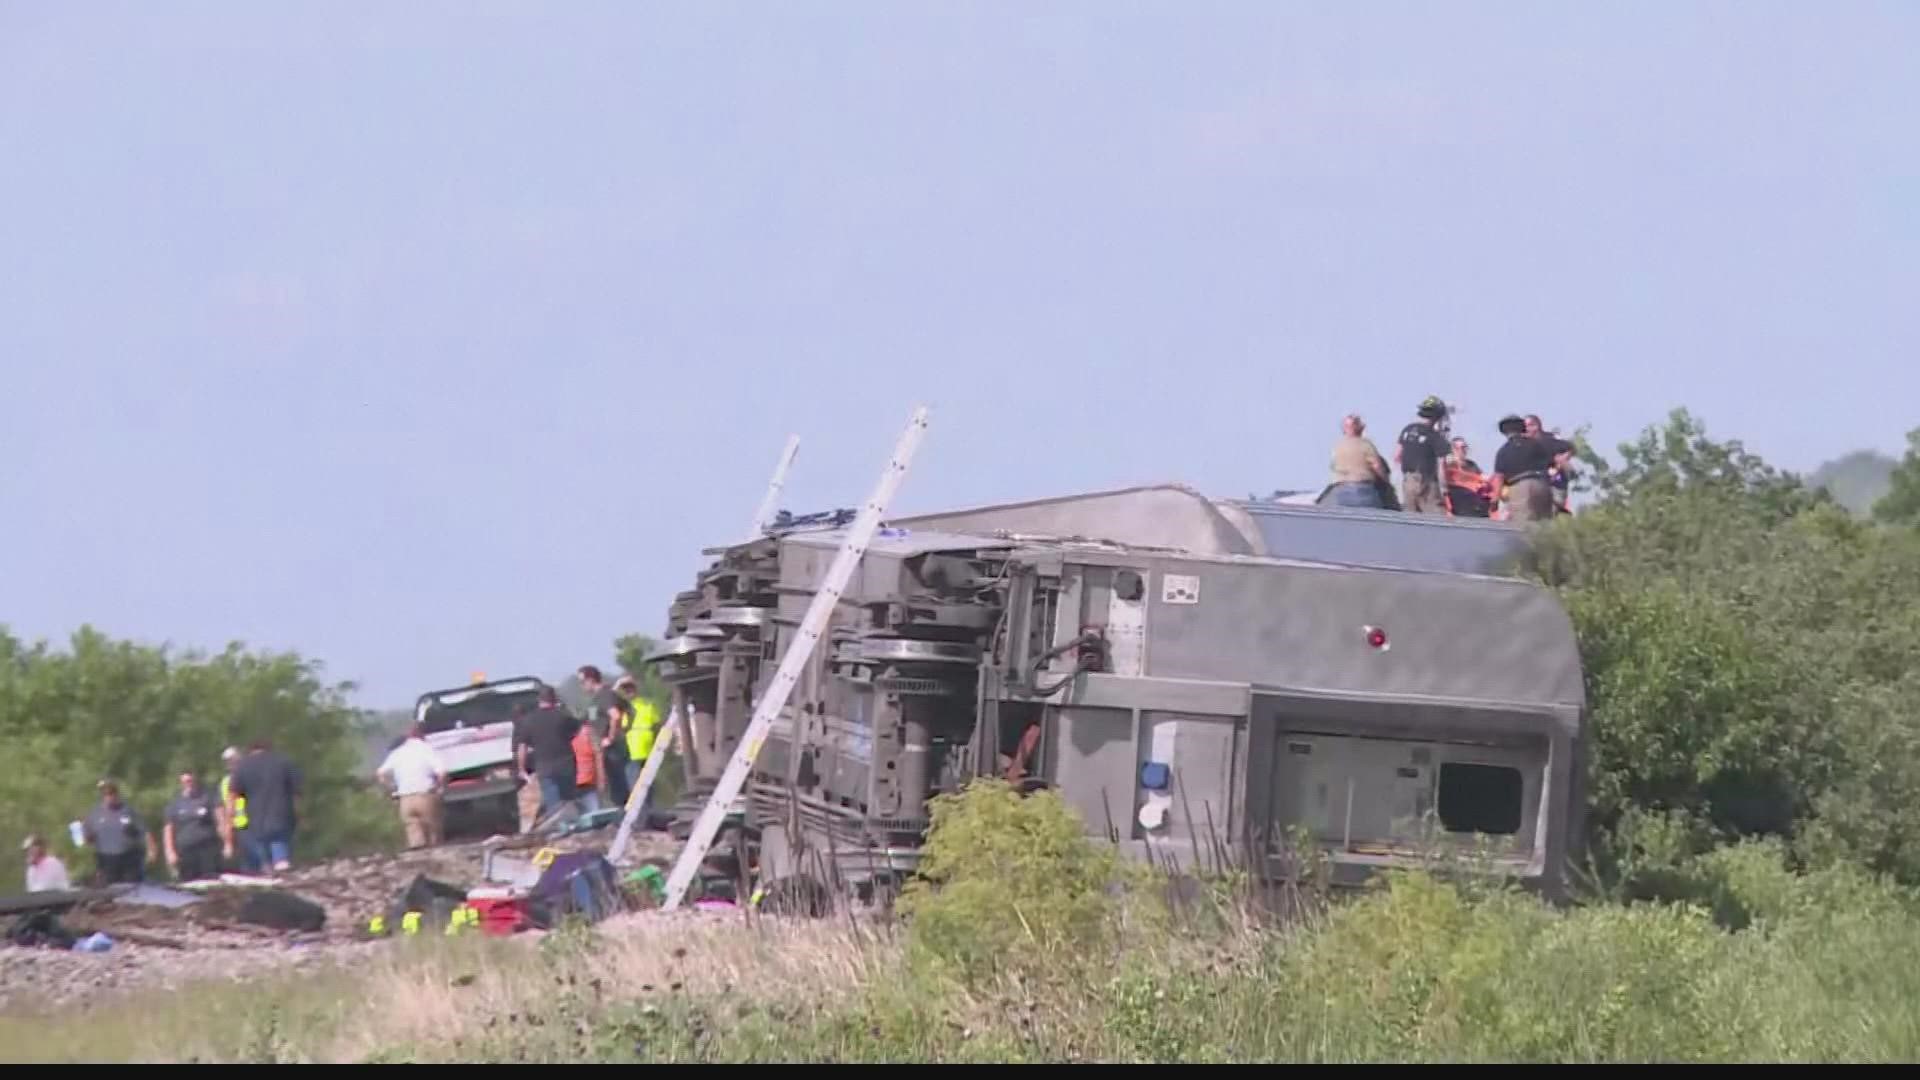 One person inside the dump truck and two people on the train were killed, a Missouri Highway Patrol spokesman said in a press conference.